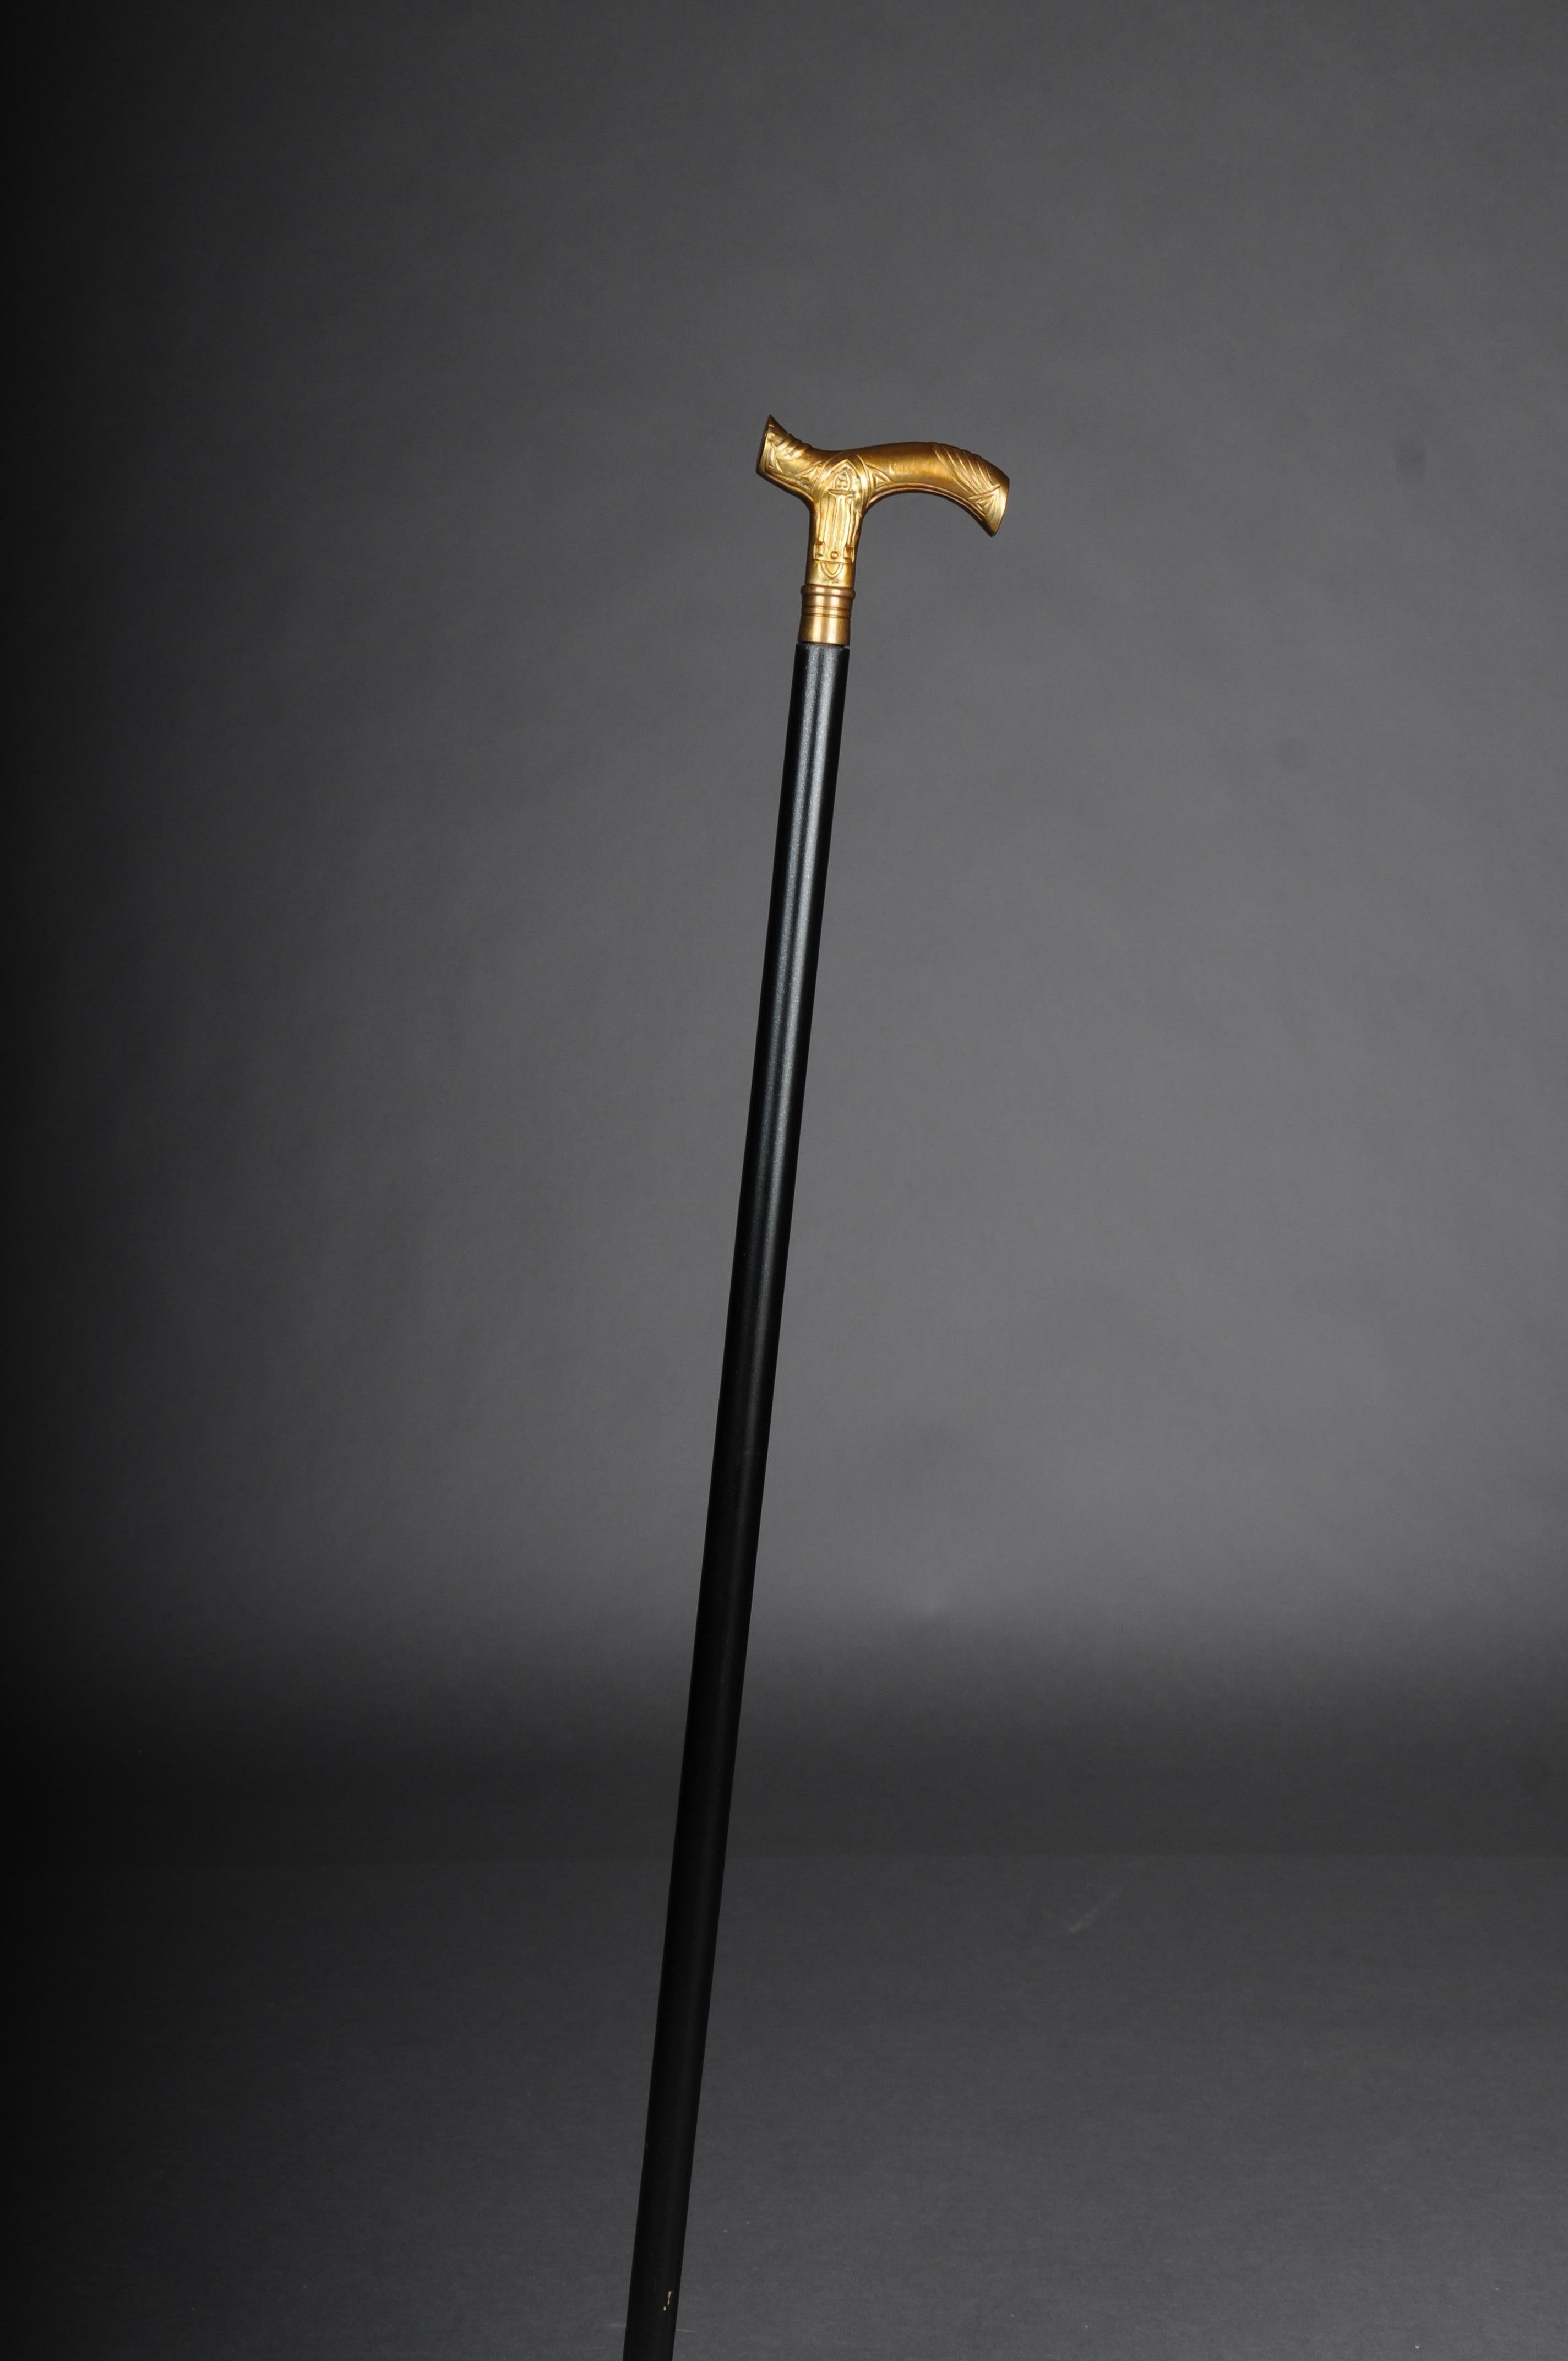 Beautiful, fine Art Nouveau walking stick bronze, gold type 3

High quality French walking stick made of high quality handle with bronze fitting.

Solid ebonized beech wood. Bronze fittings finely crafted with relief in a fantastically beautiful Art